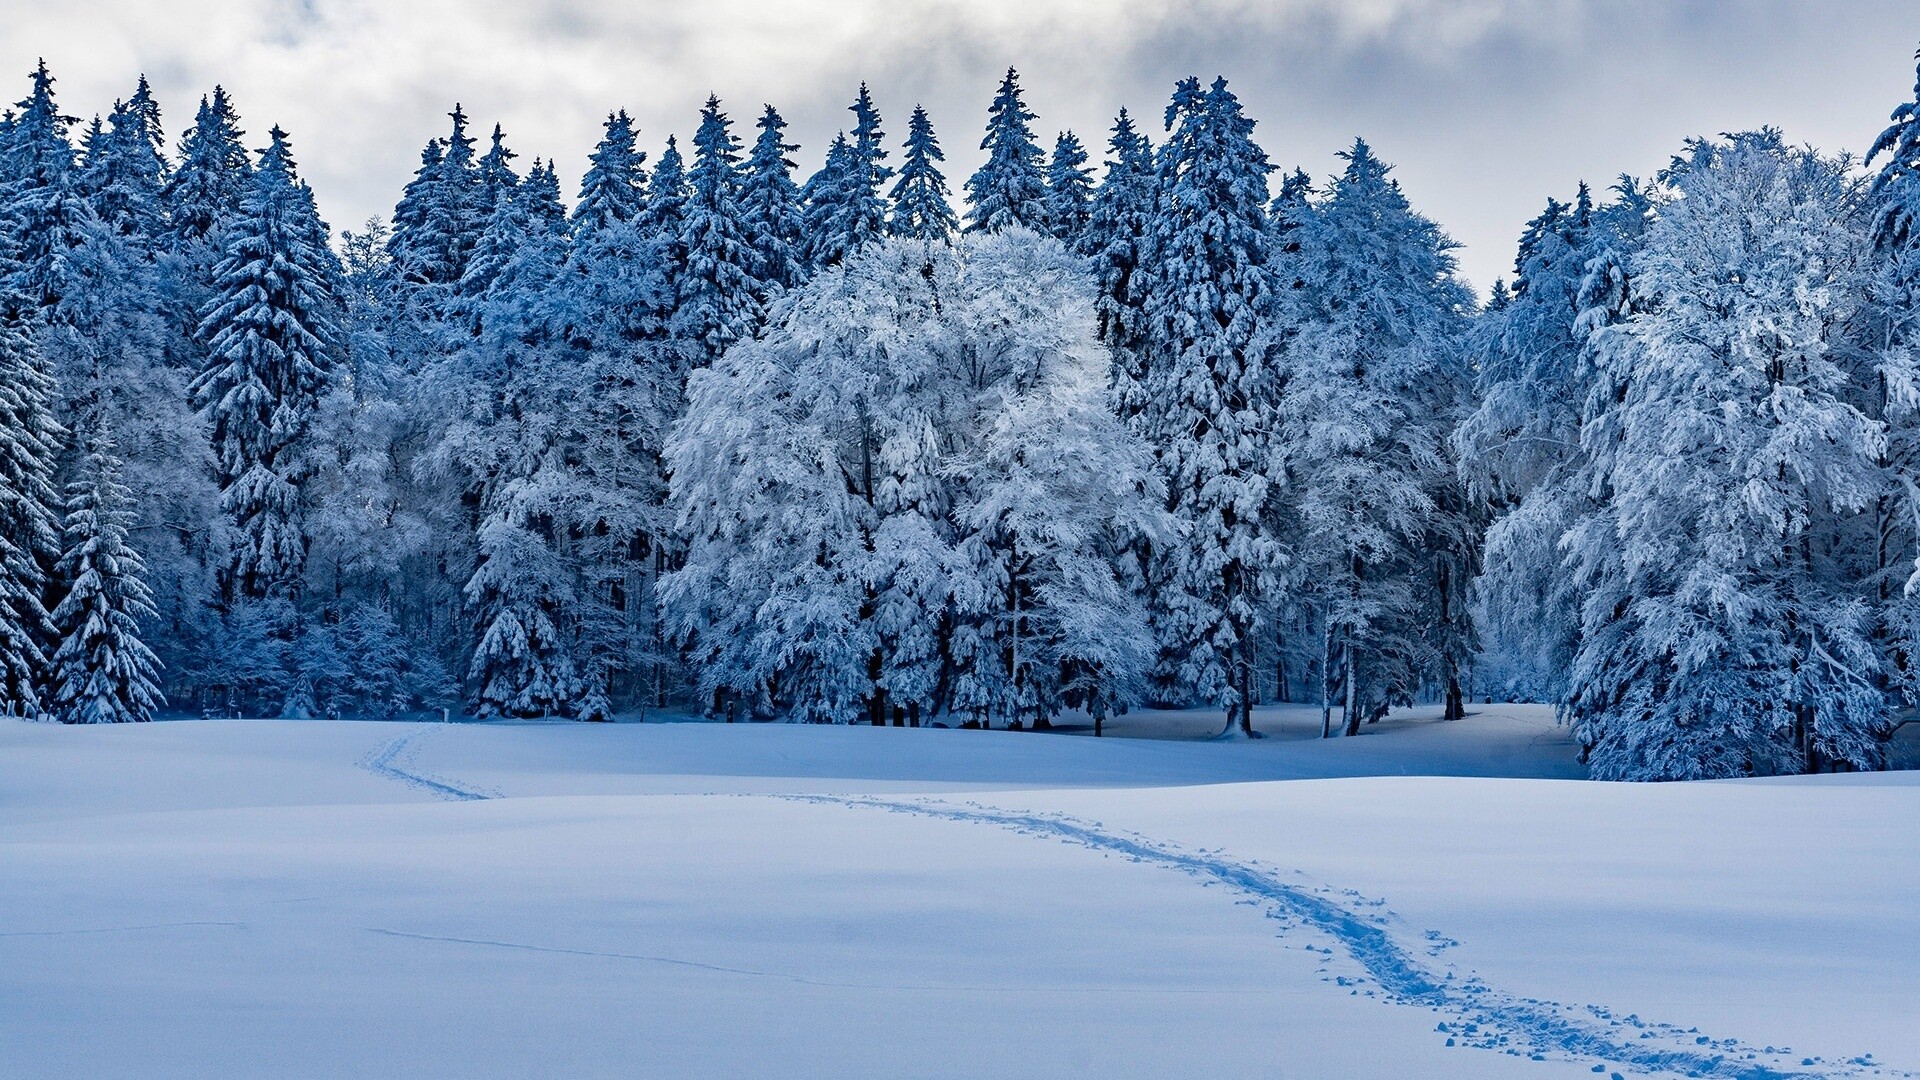 Snow forest wallpapers, Winter beauty, Serene landscape, Snow-covered trees, 1920x1080 Full HD Desktop